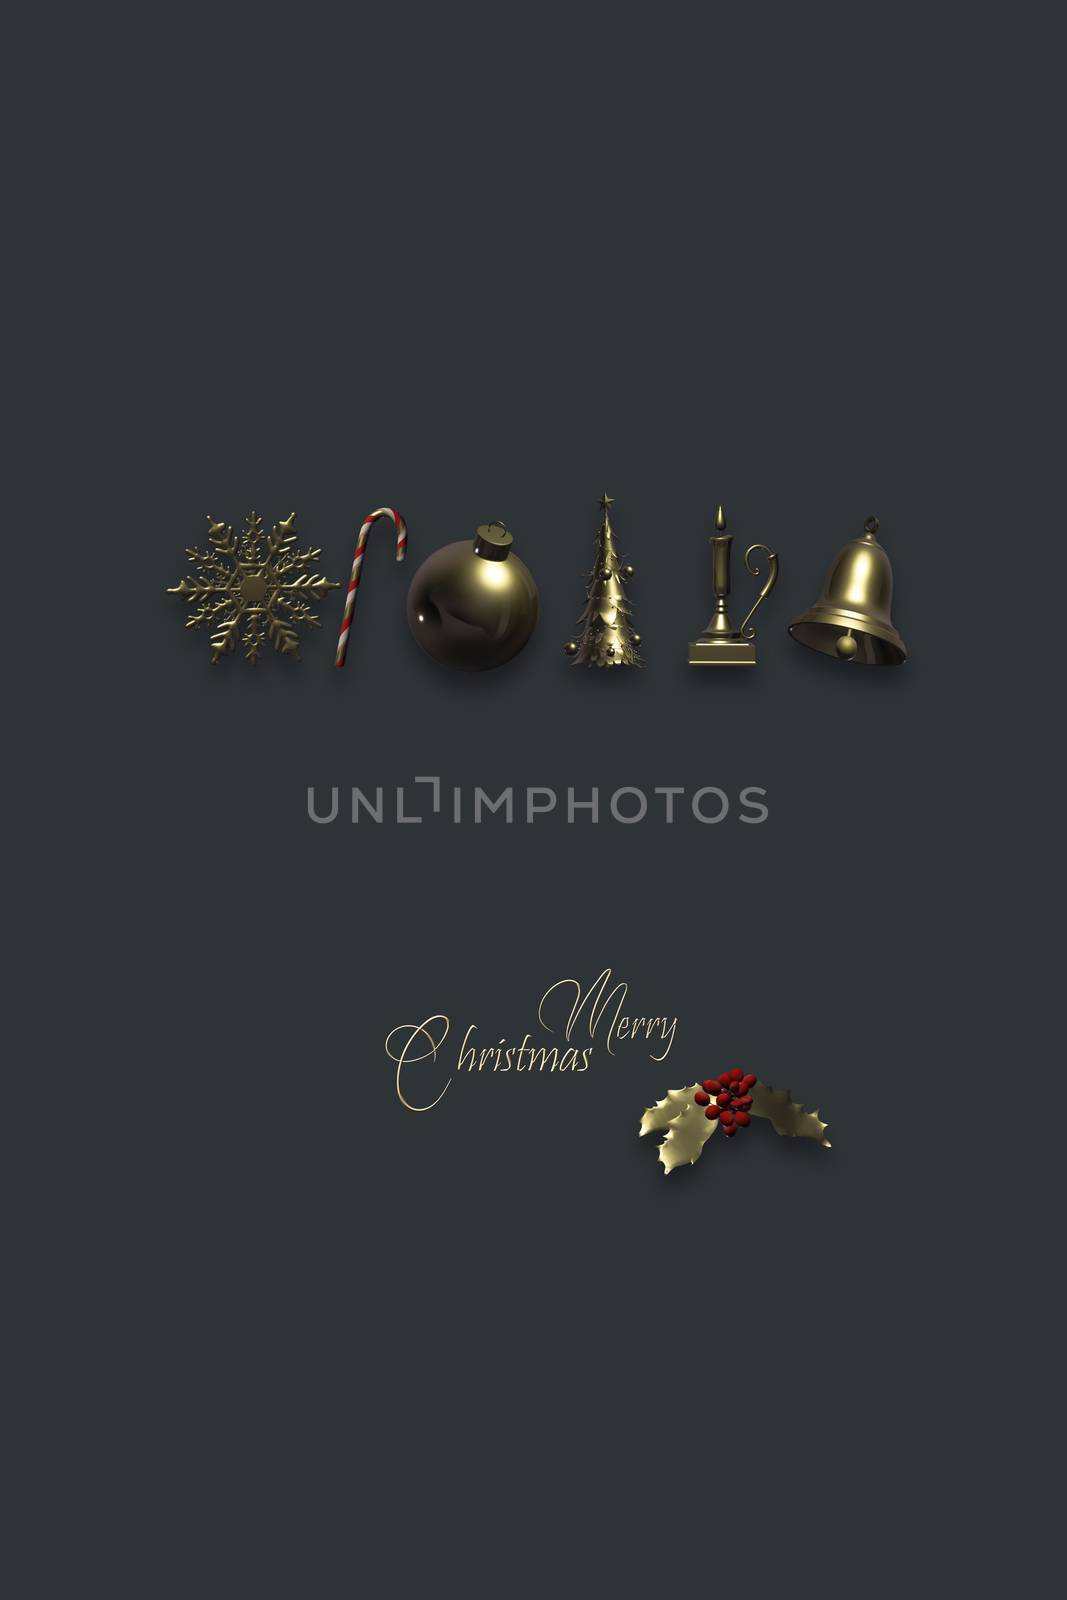 Christmas background with gold symbols of Xmas. Snowflakes, candy cane, ball, tree, candle, bell. Shiny gold text Merry Christmas on dark background. 3D render. Place for text